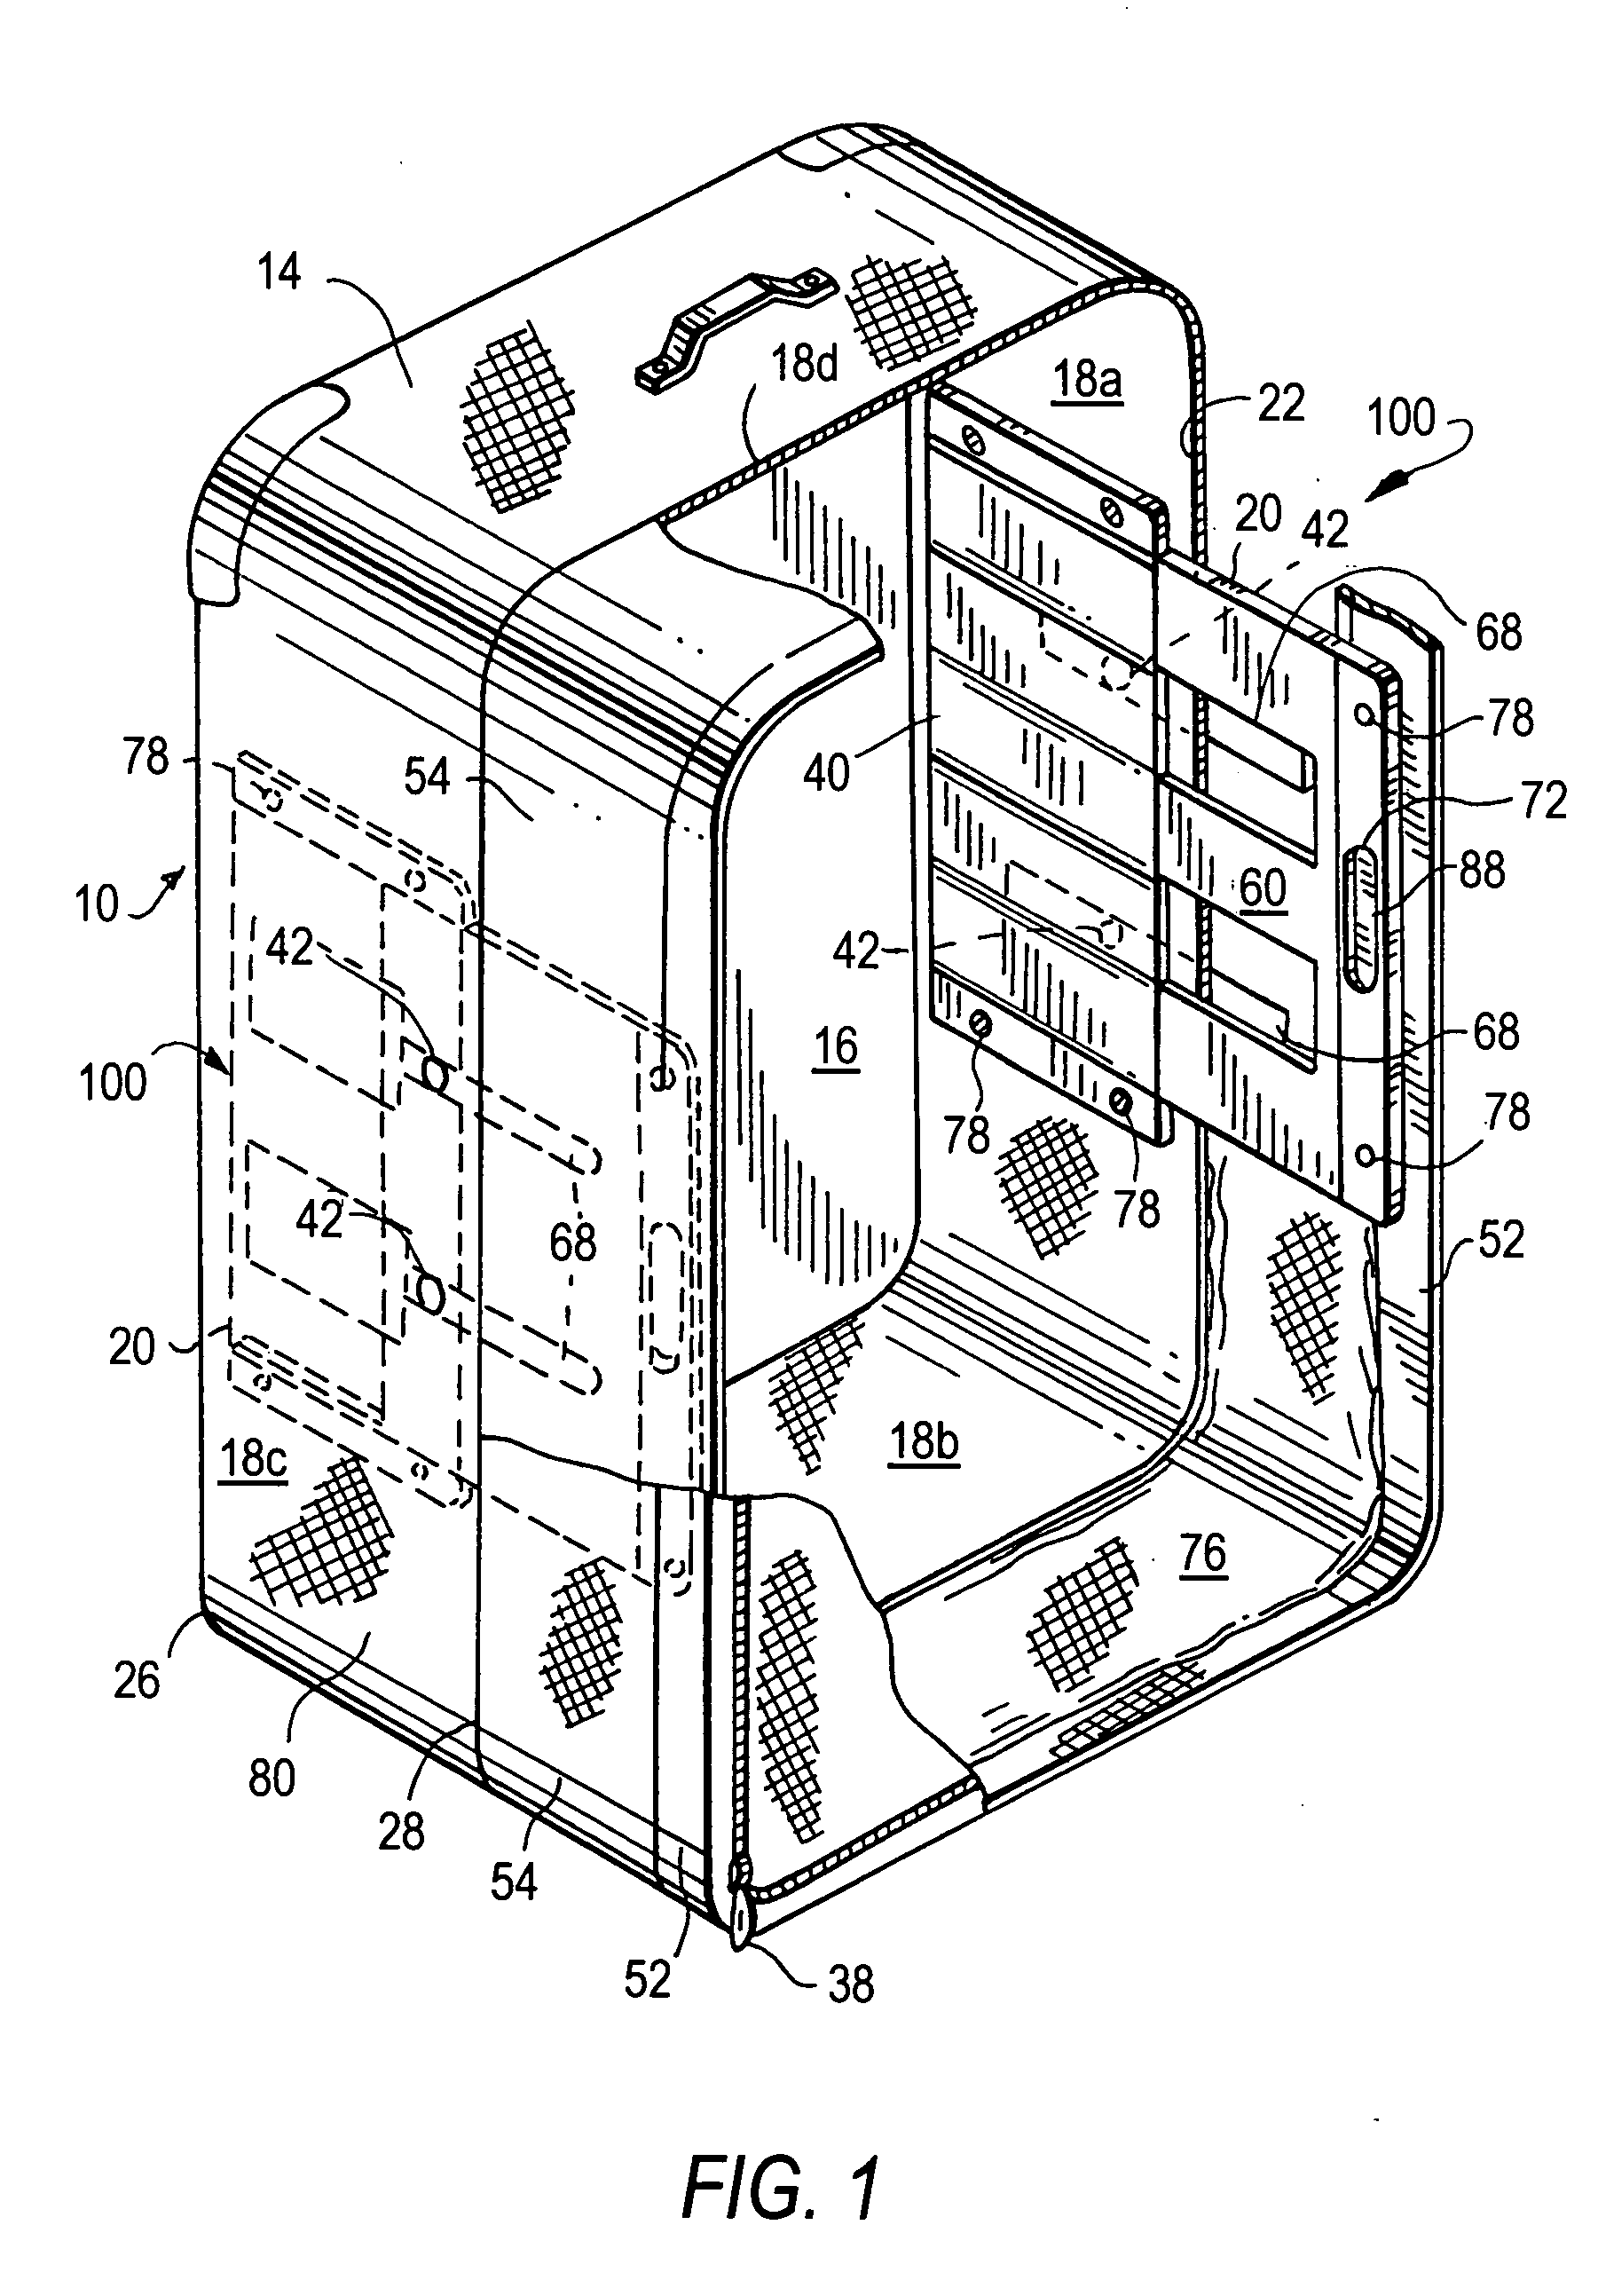 Expandable luggage with locking expansion mechanism